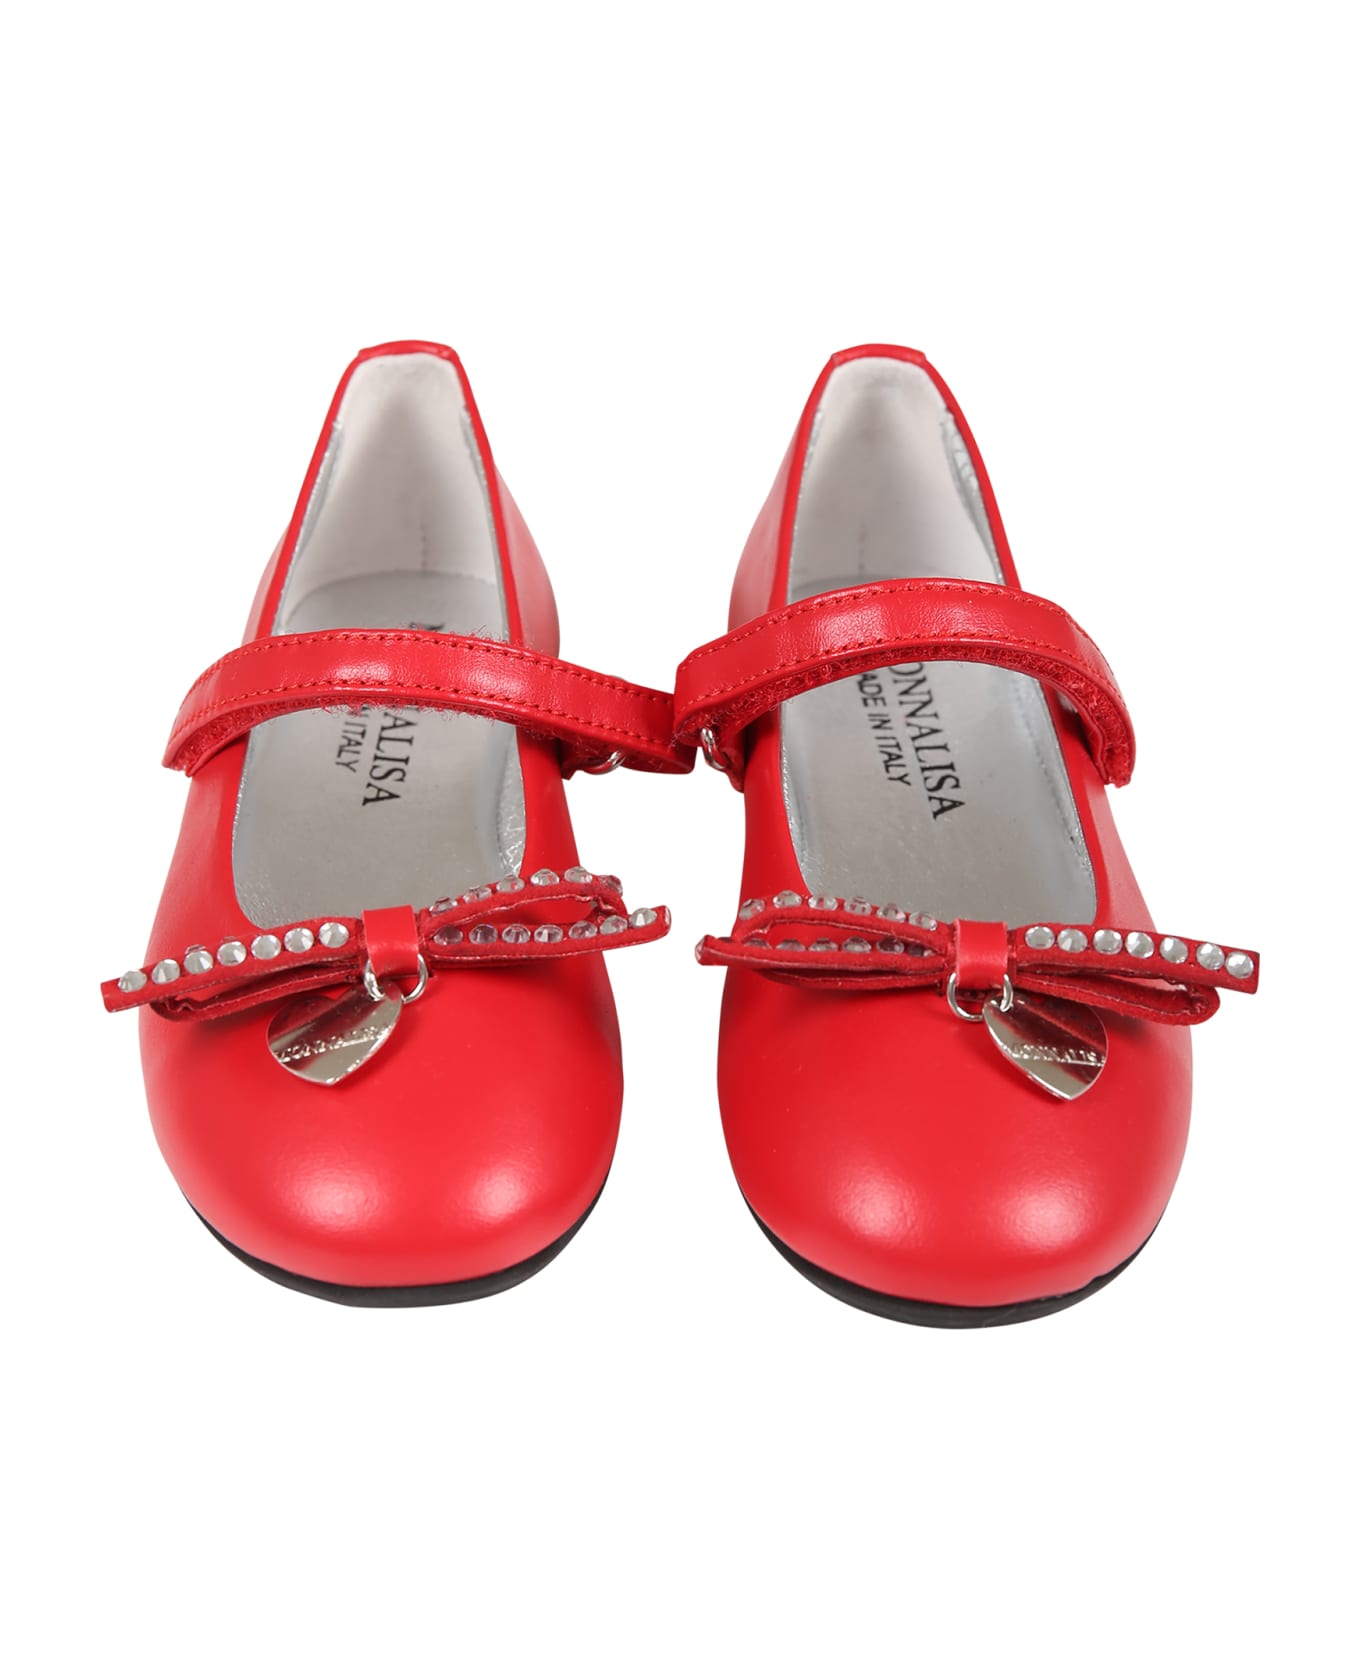 Monnalisa Red Ballet Flats For Girl With Bow - Red シューズ